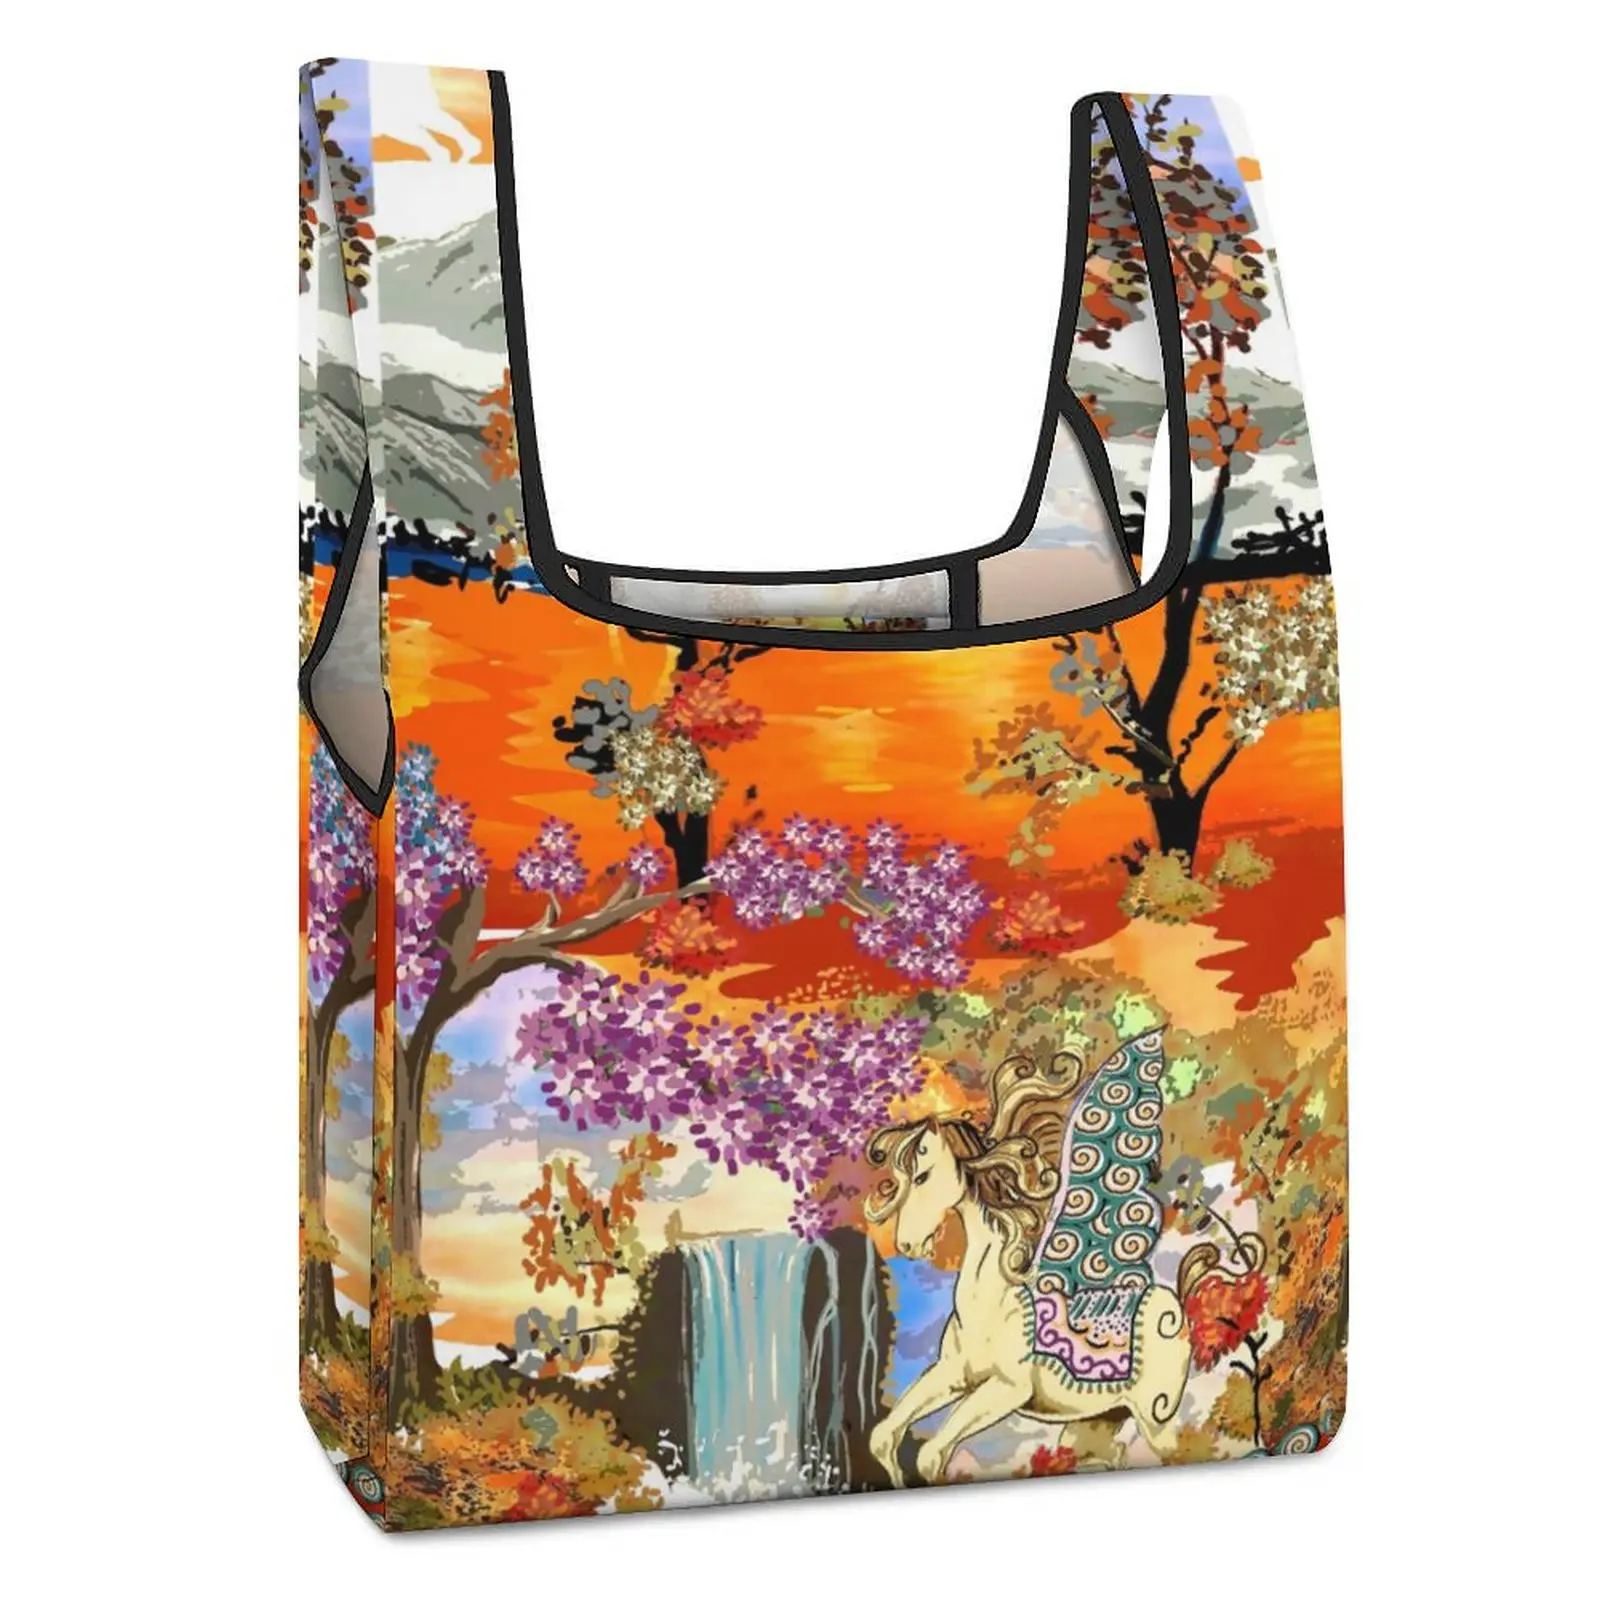 Customized Printed Collapsible Shopping Bag Double Strap Handbag Colored Printing Tote Casual Woman Grocery Bag Custom Pattern customized print collapsible shopping double strap handbag colorful shell printing tote casual woman grocery bag custom pattern